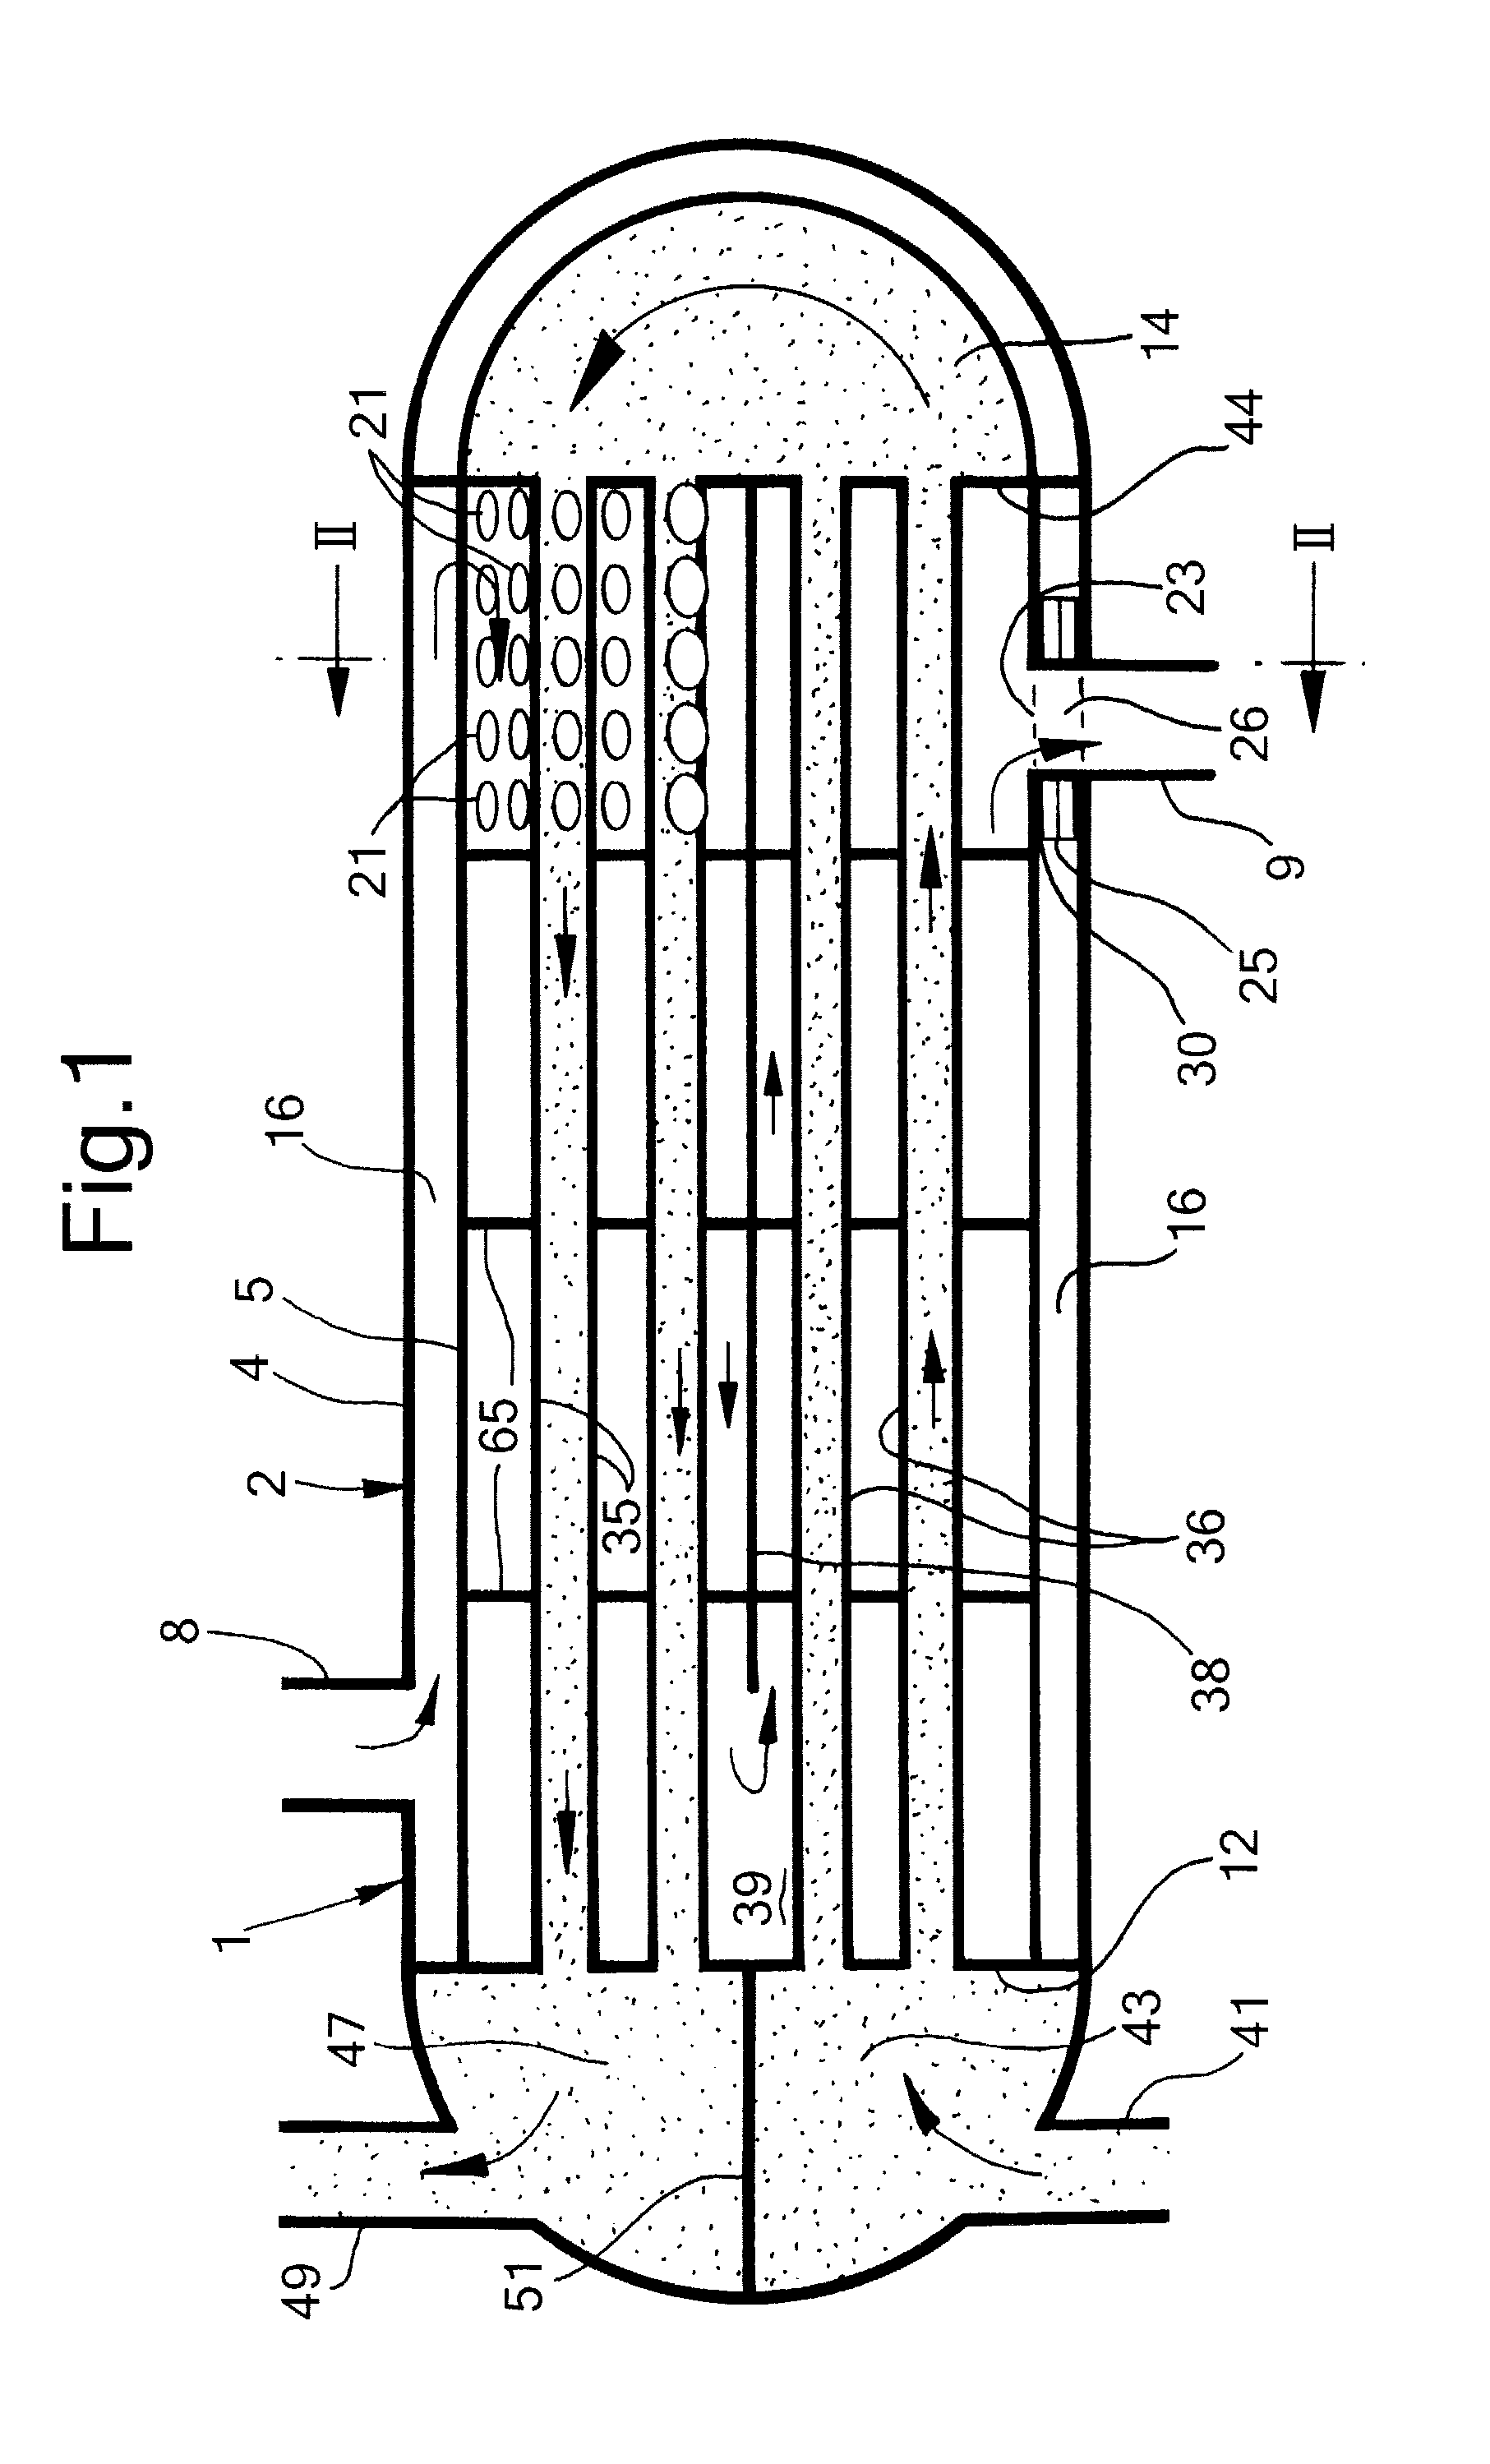 Heat exchanger shell assembly and method of assembling